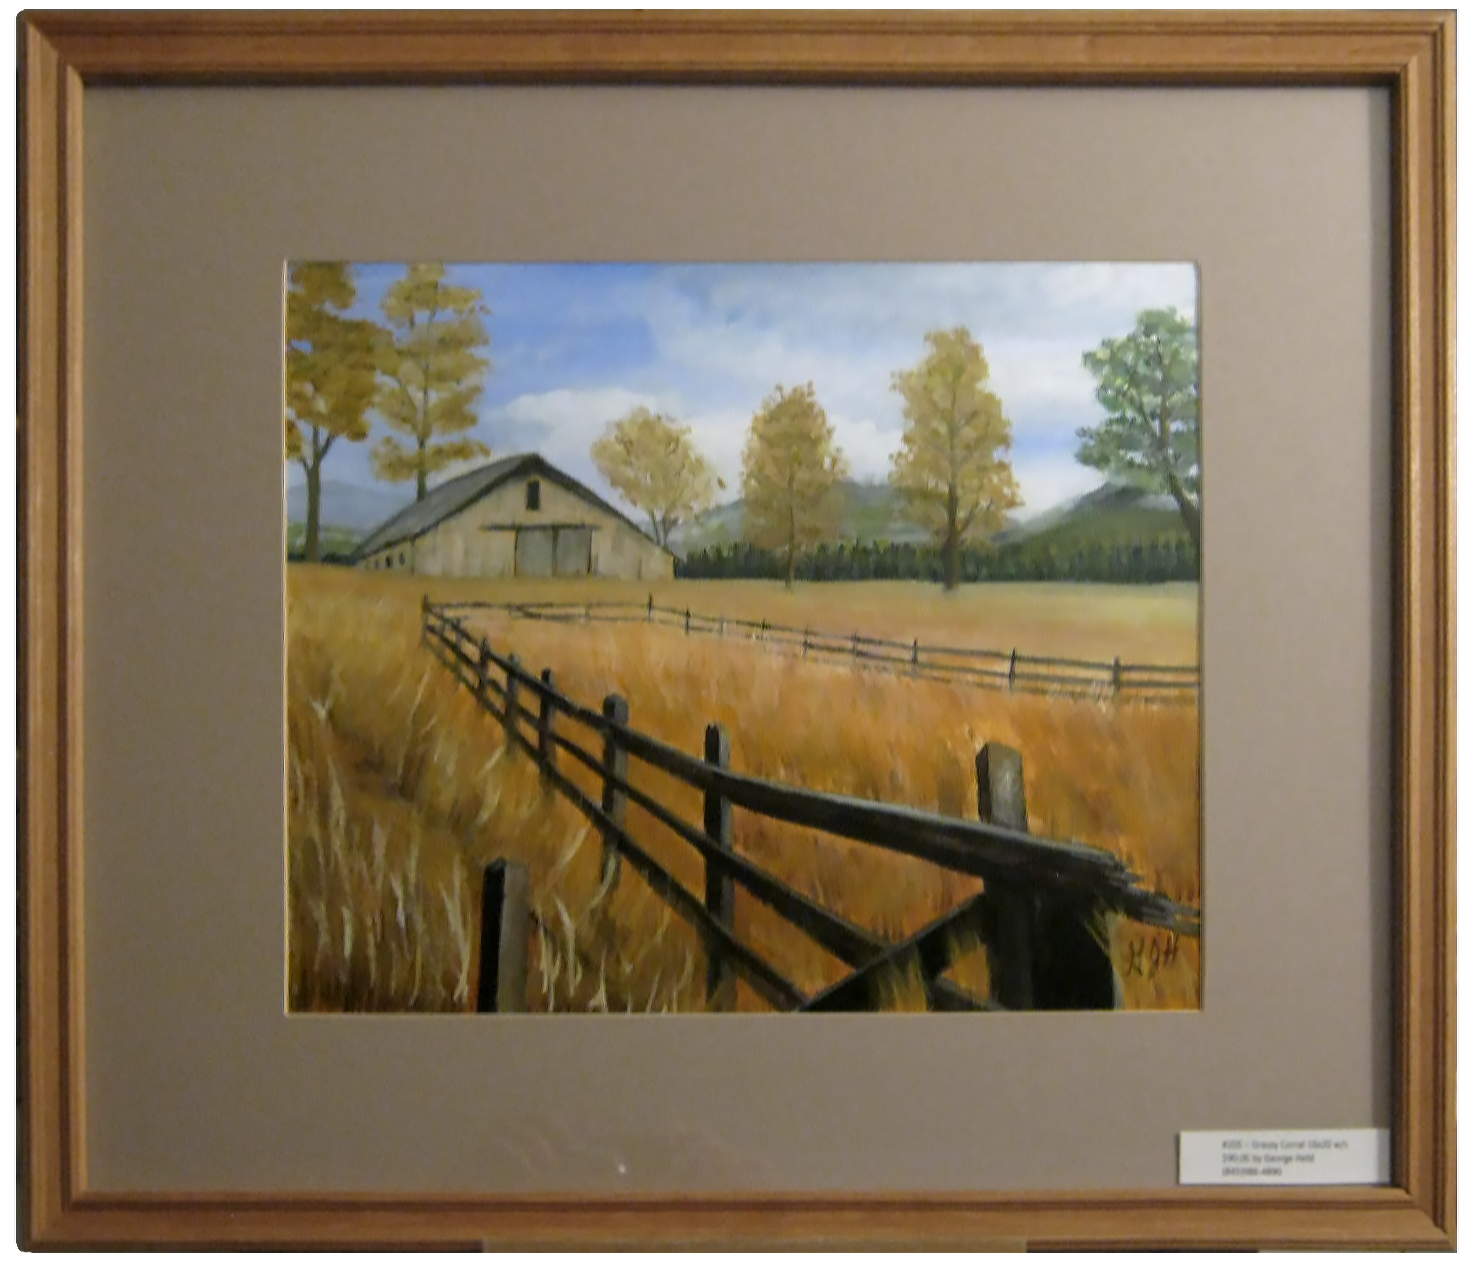 Painting by Warwick, NY artist: George Held - entitled "Grassy Coral"